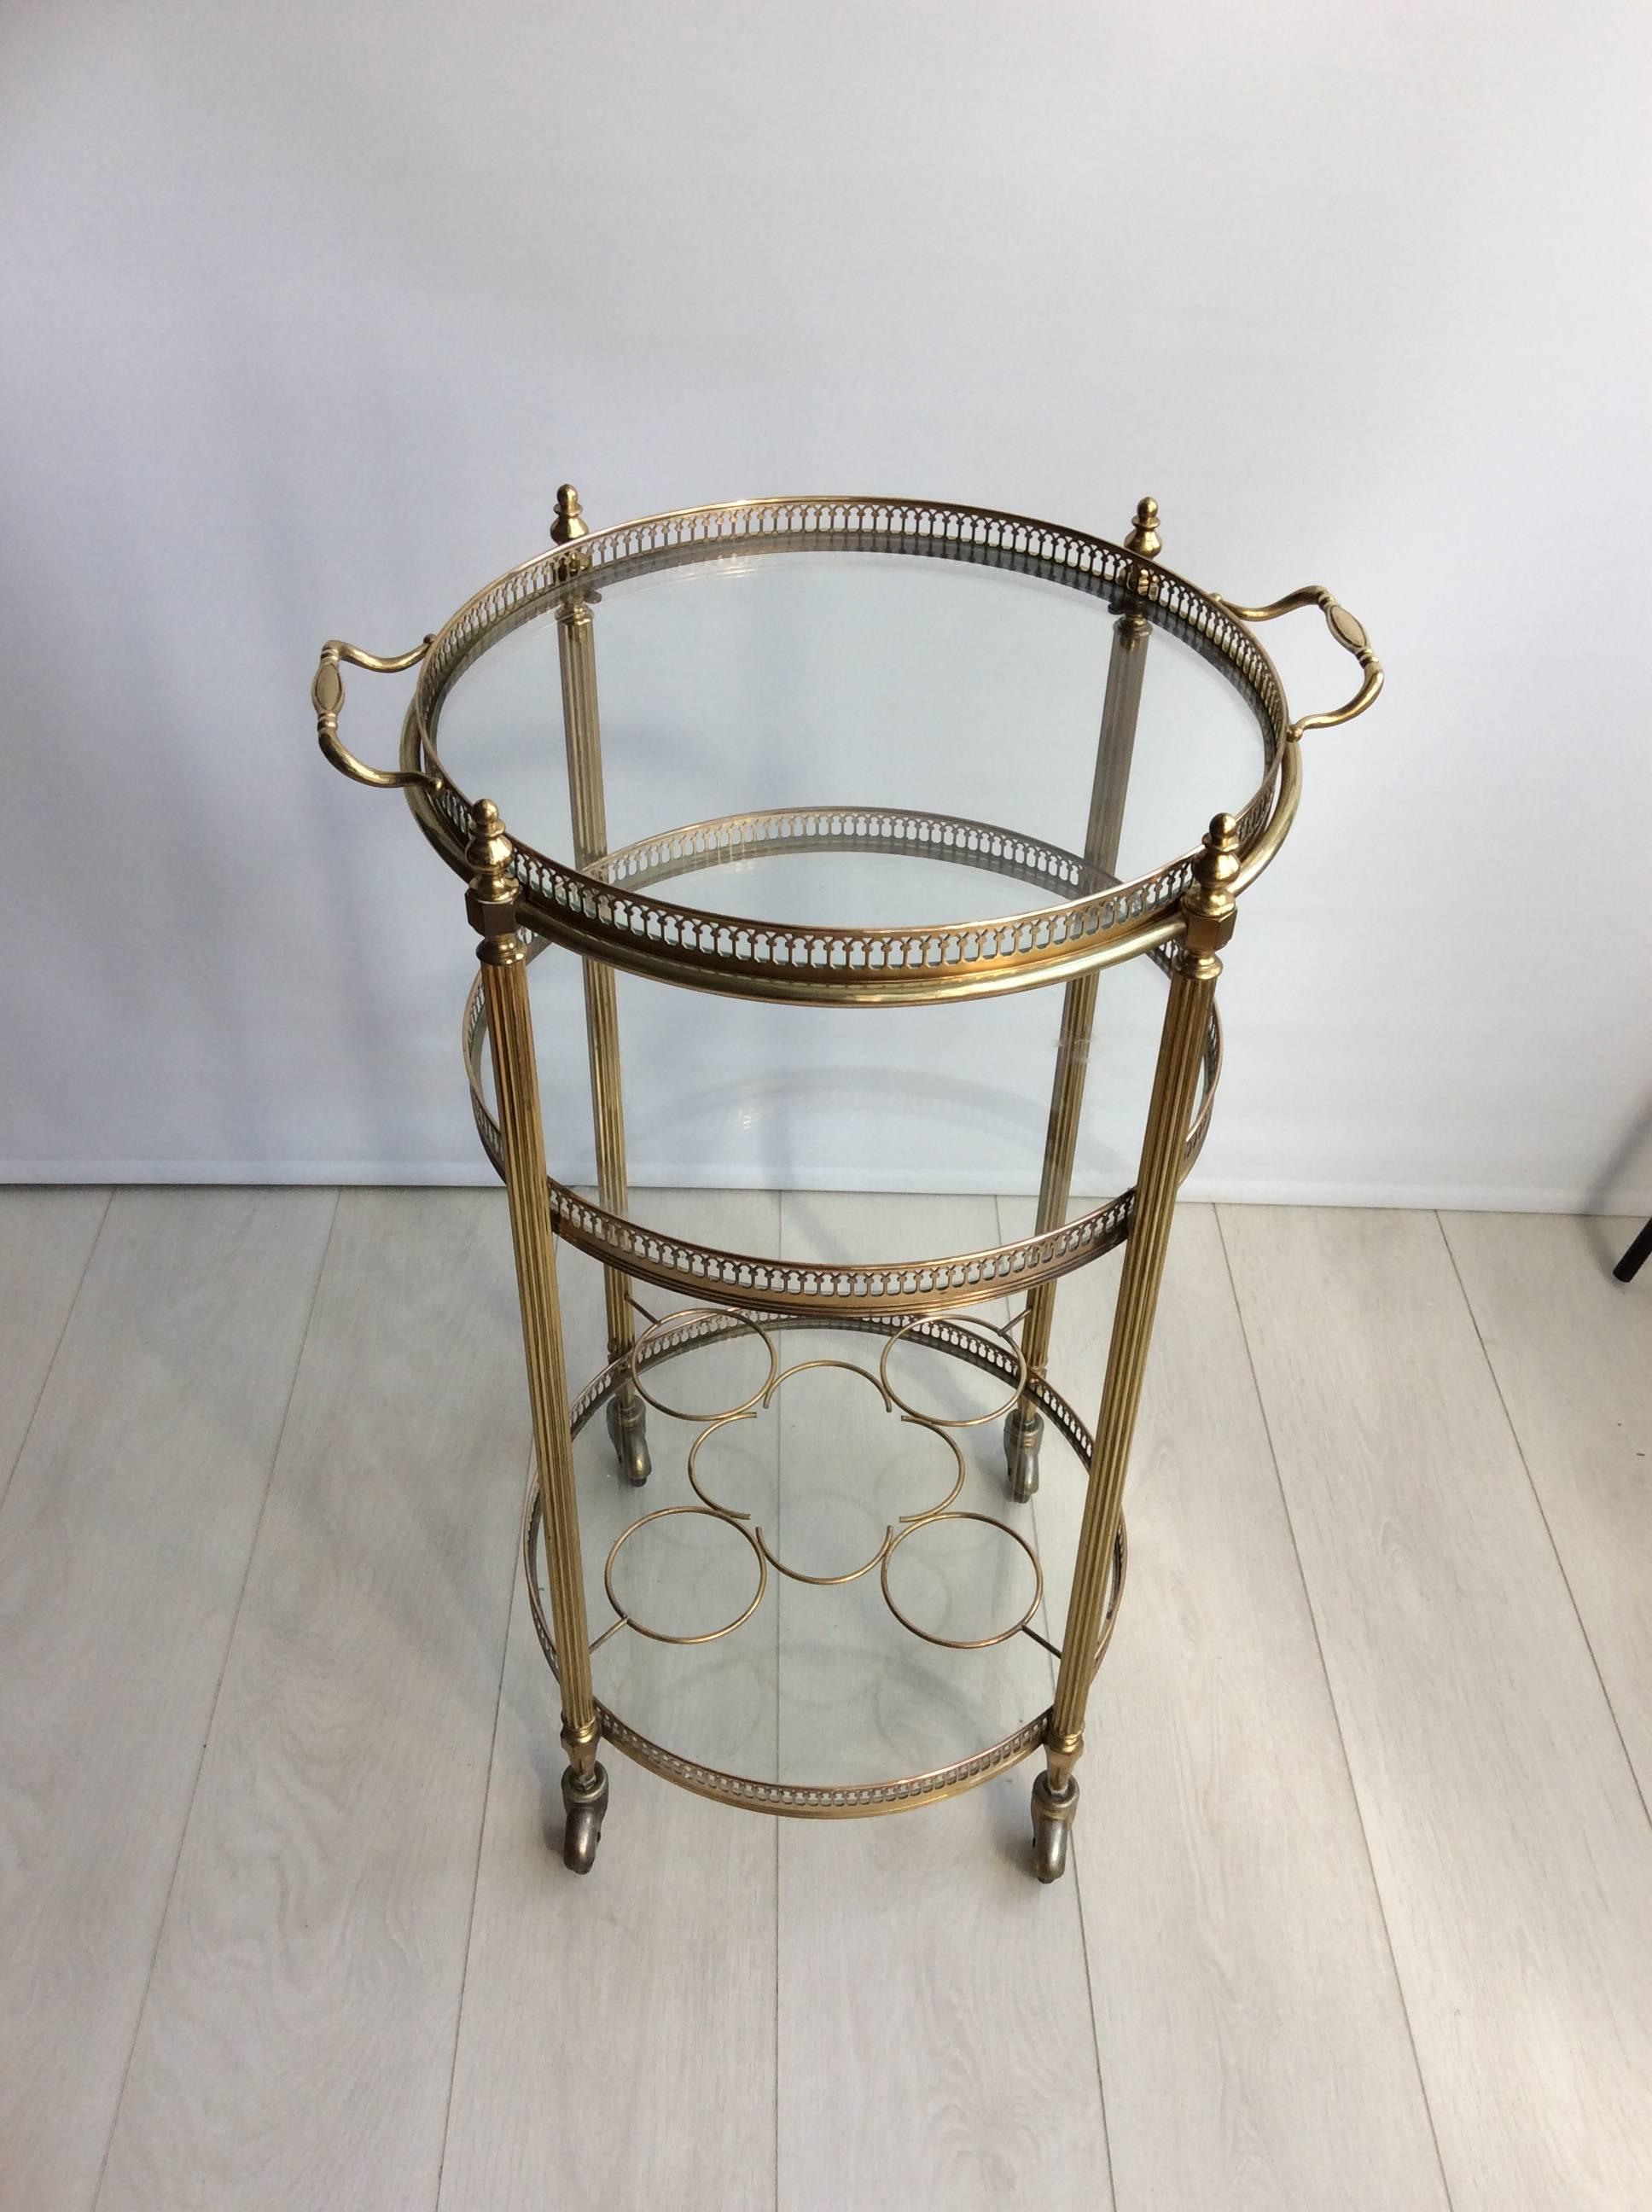 Beautiful French drinks trolley, circa 1950

Taller than usual with three tiers and bottle holder to lower tier

Measures 40.5 cm across, 49.5 cm with handle, 79 cm tall.